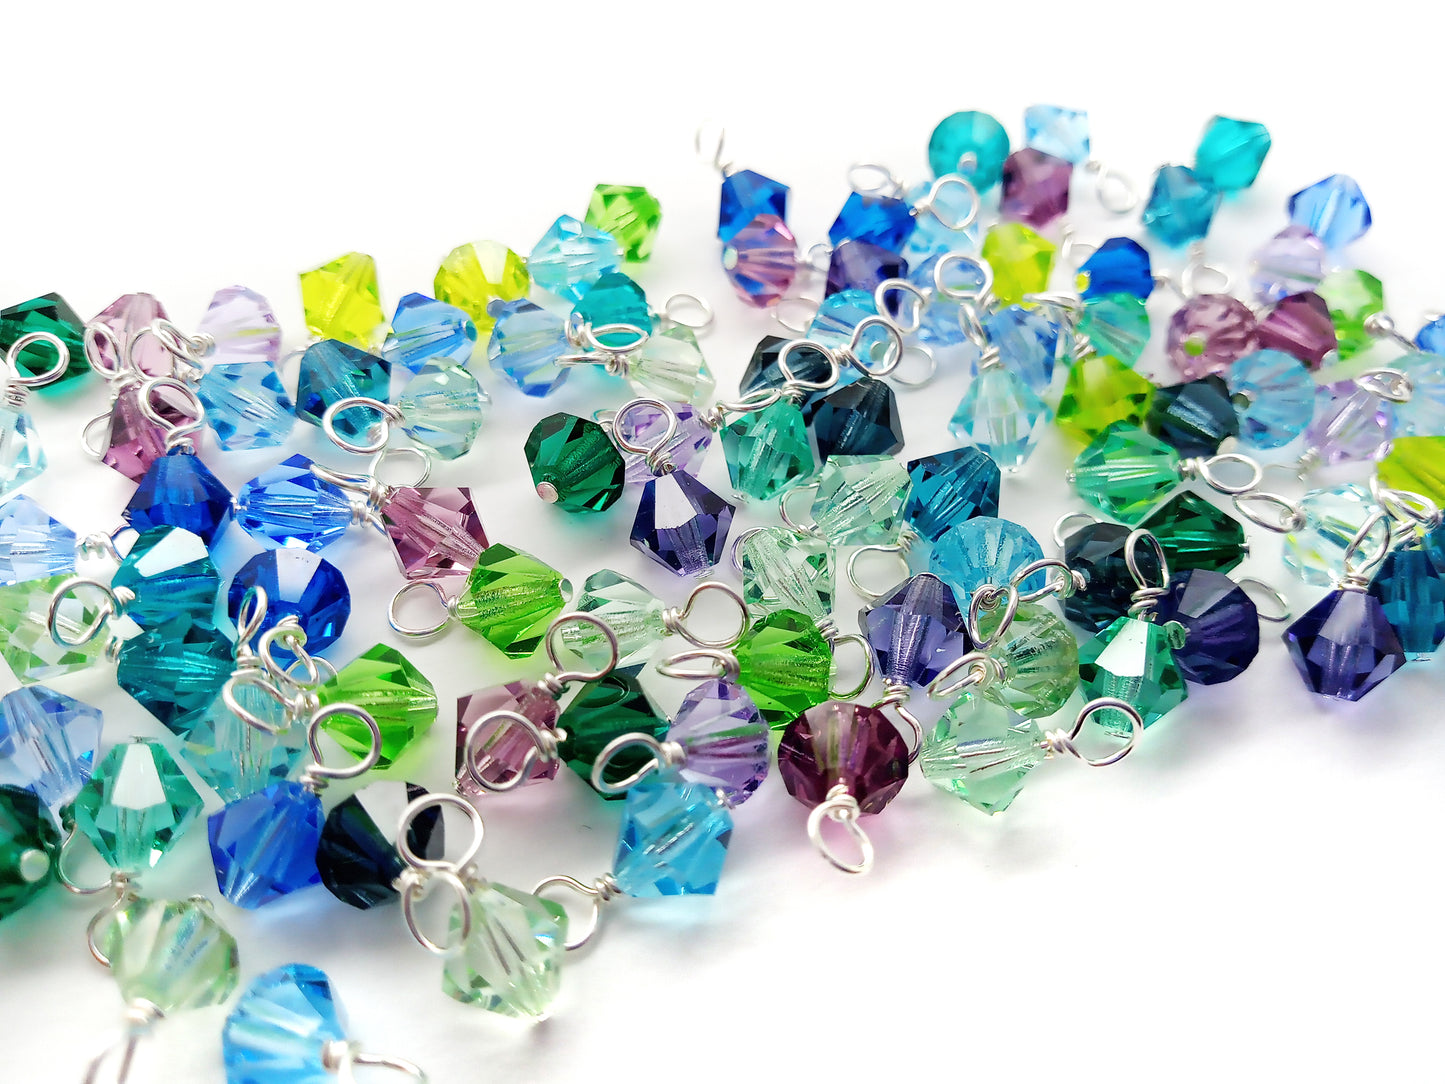 25 Bicone Dangles, Mix of Bead Charms in Blue, Green & Purple, 6mm Bicone Beads